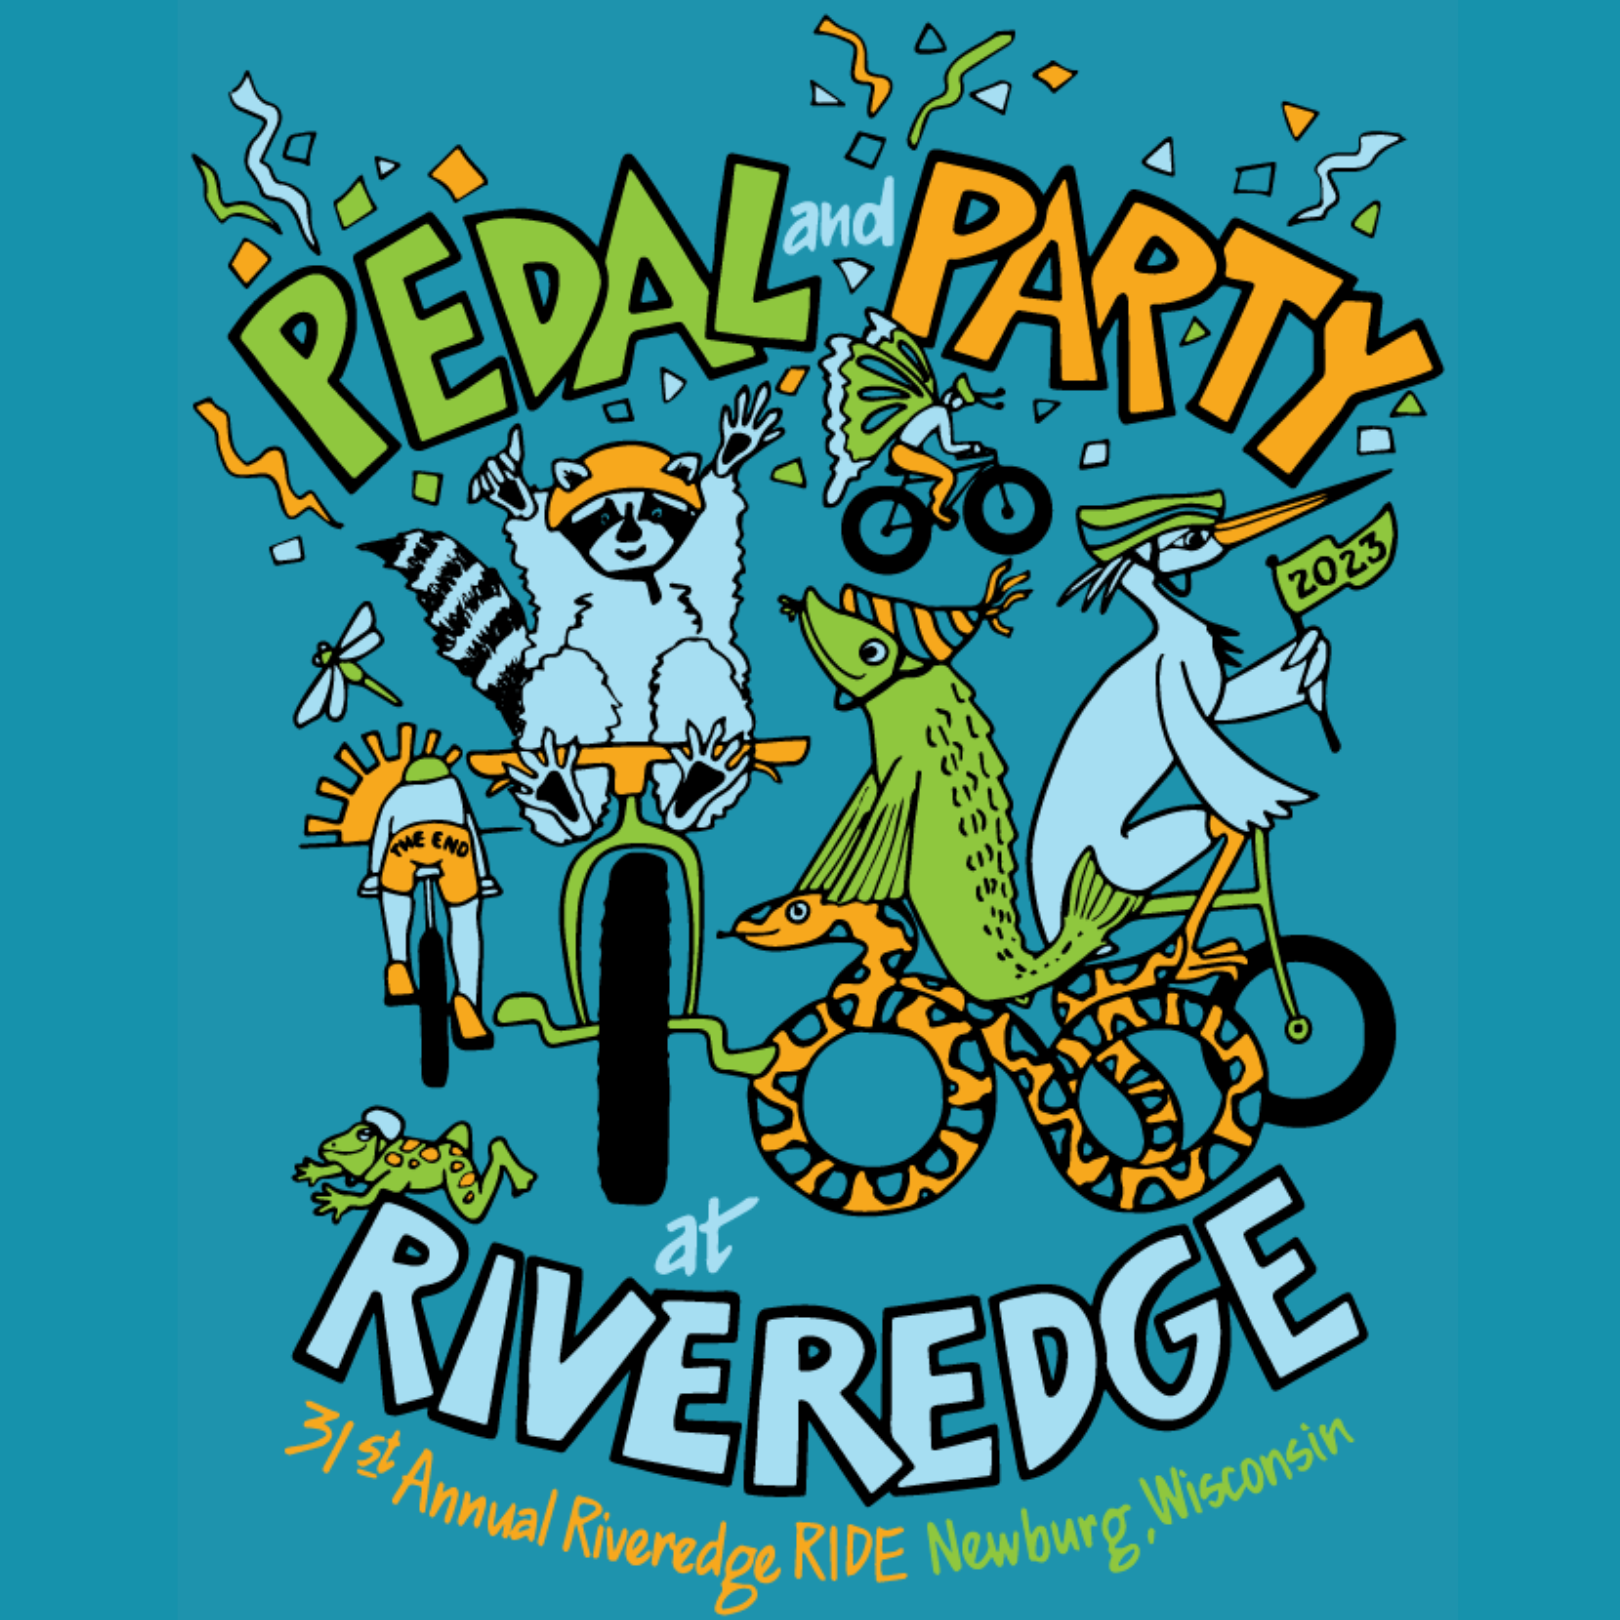 Riveredge Bike Ride Pedal and Party! Wisconsin Bike Fed